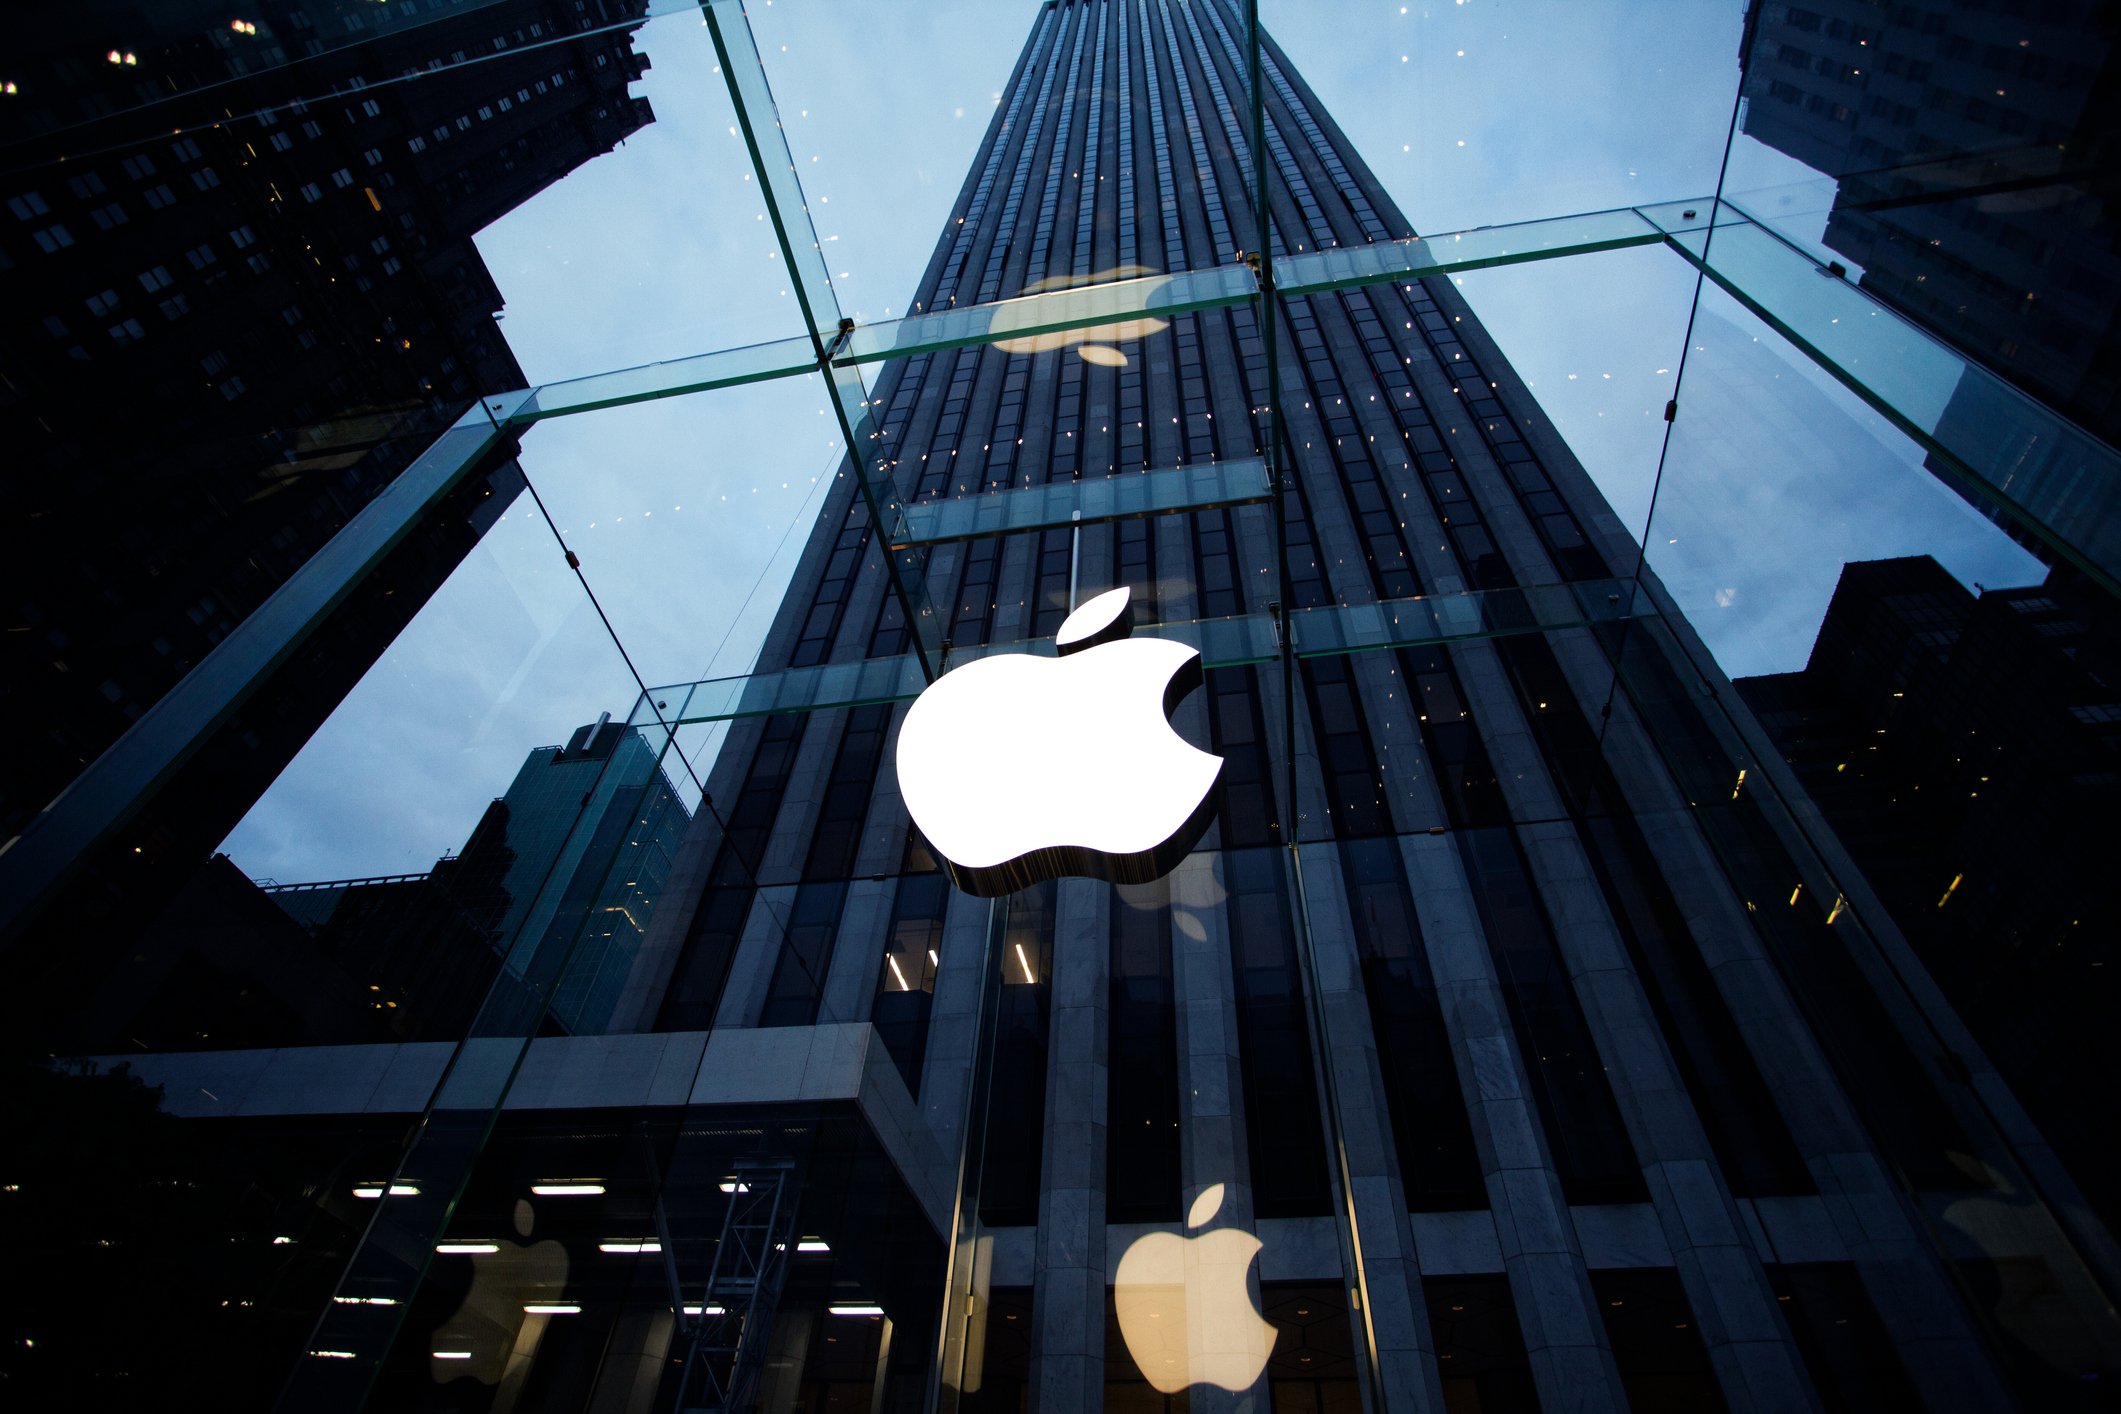 NLRB claims Apple’s rules violate employees’ rights